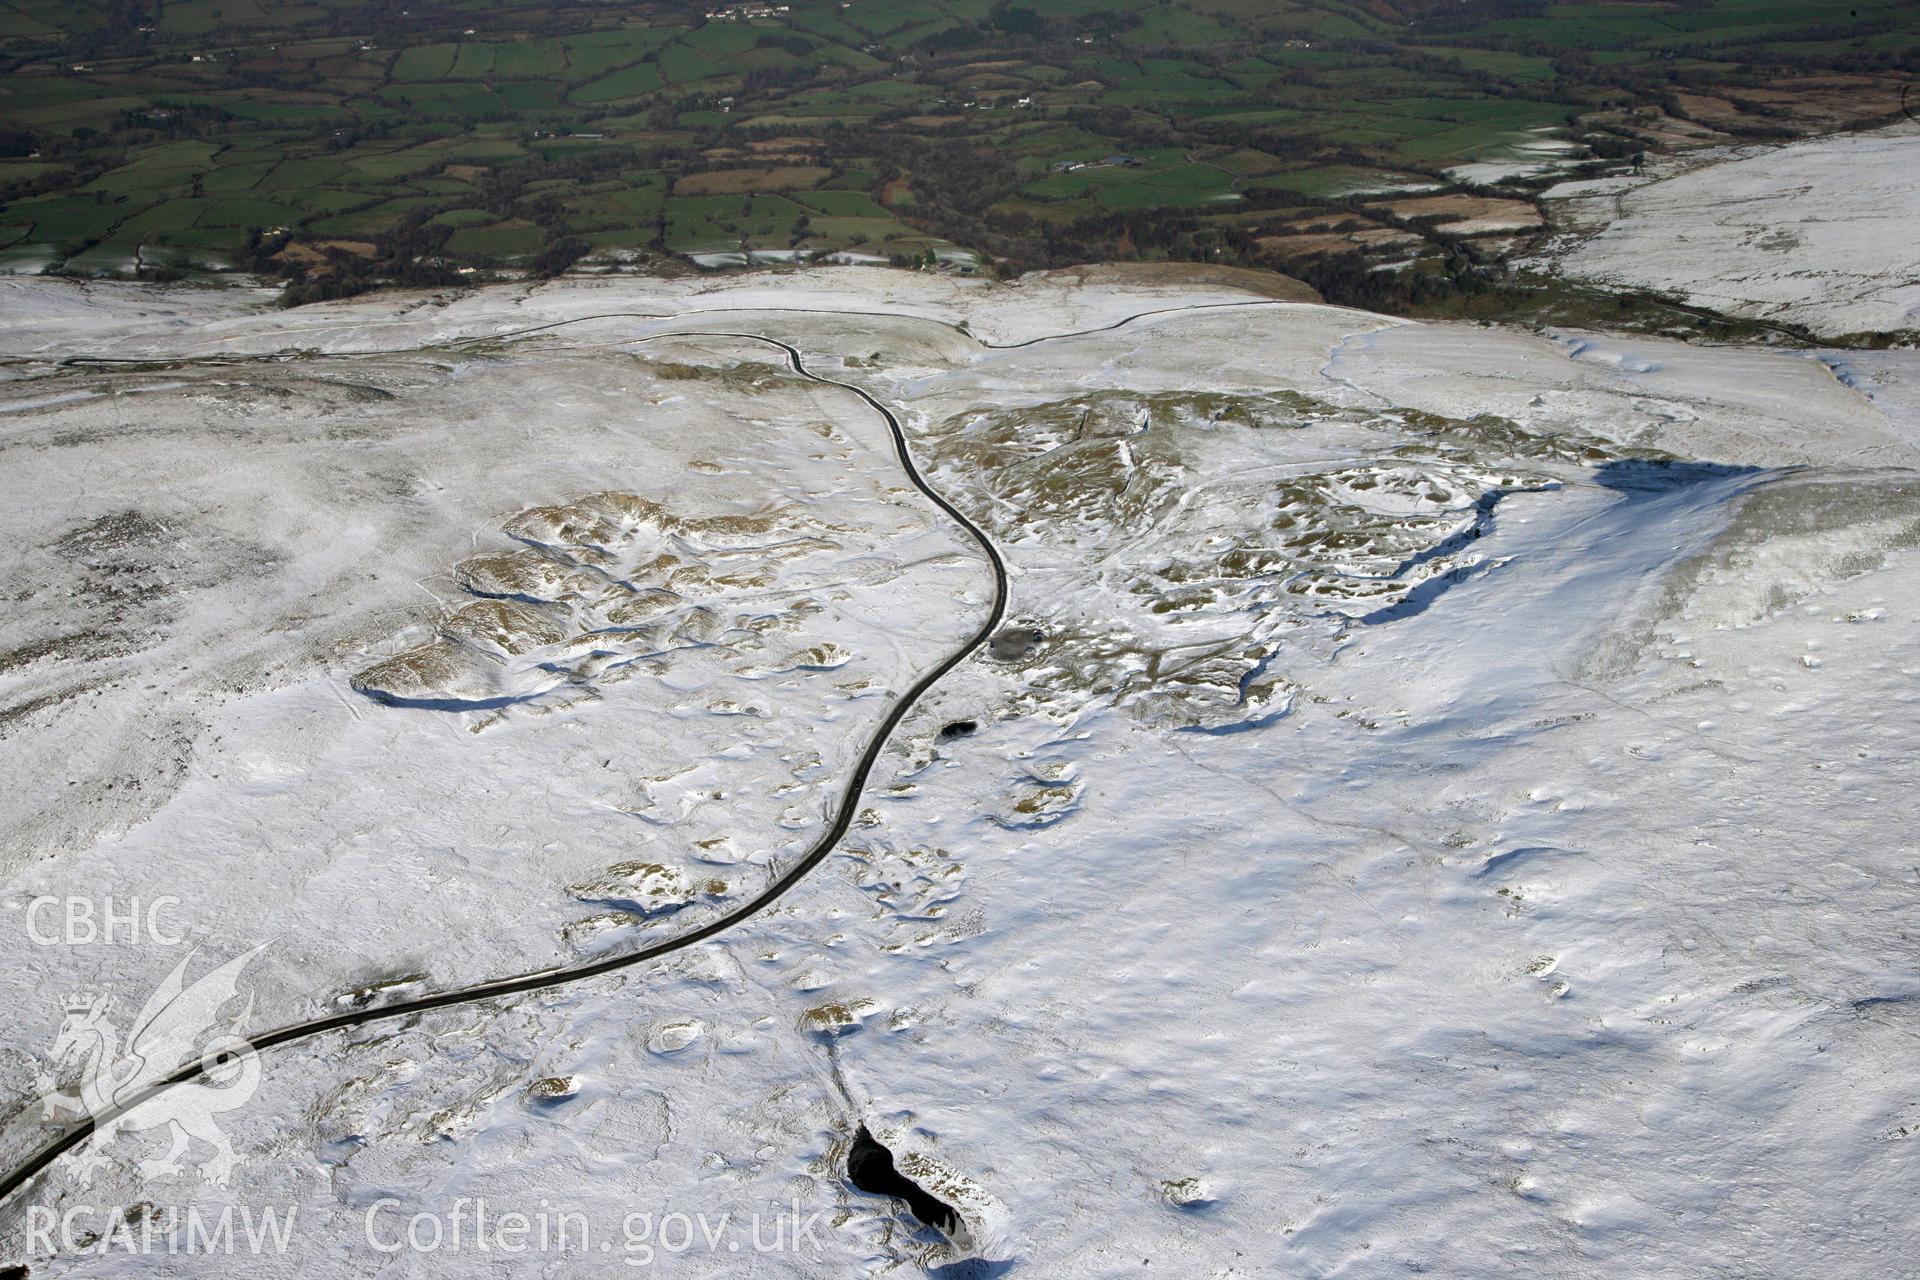 RCAHMW colour oblique photograph of Foel Fawr Quarry Complex. Taken by Toby Driver on 02/02/2012.